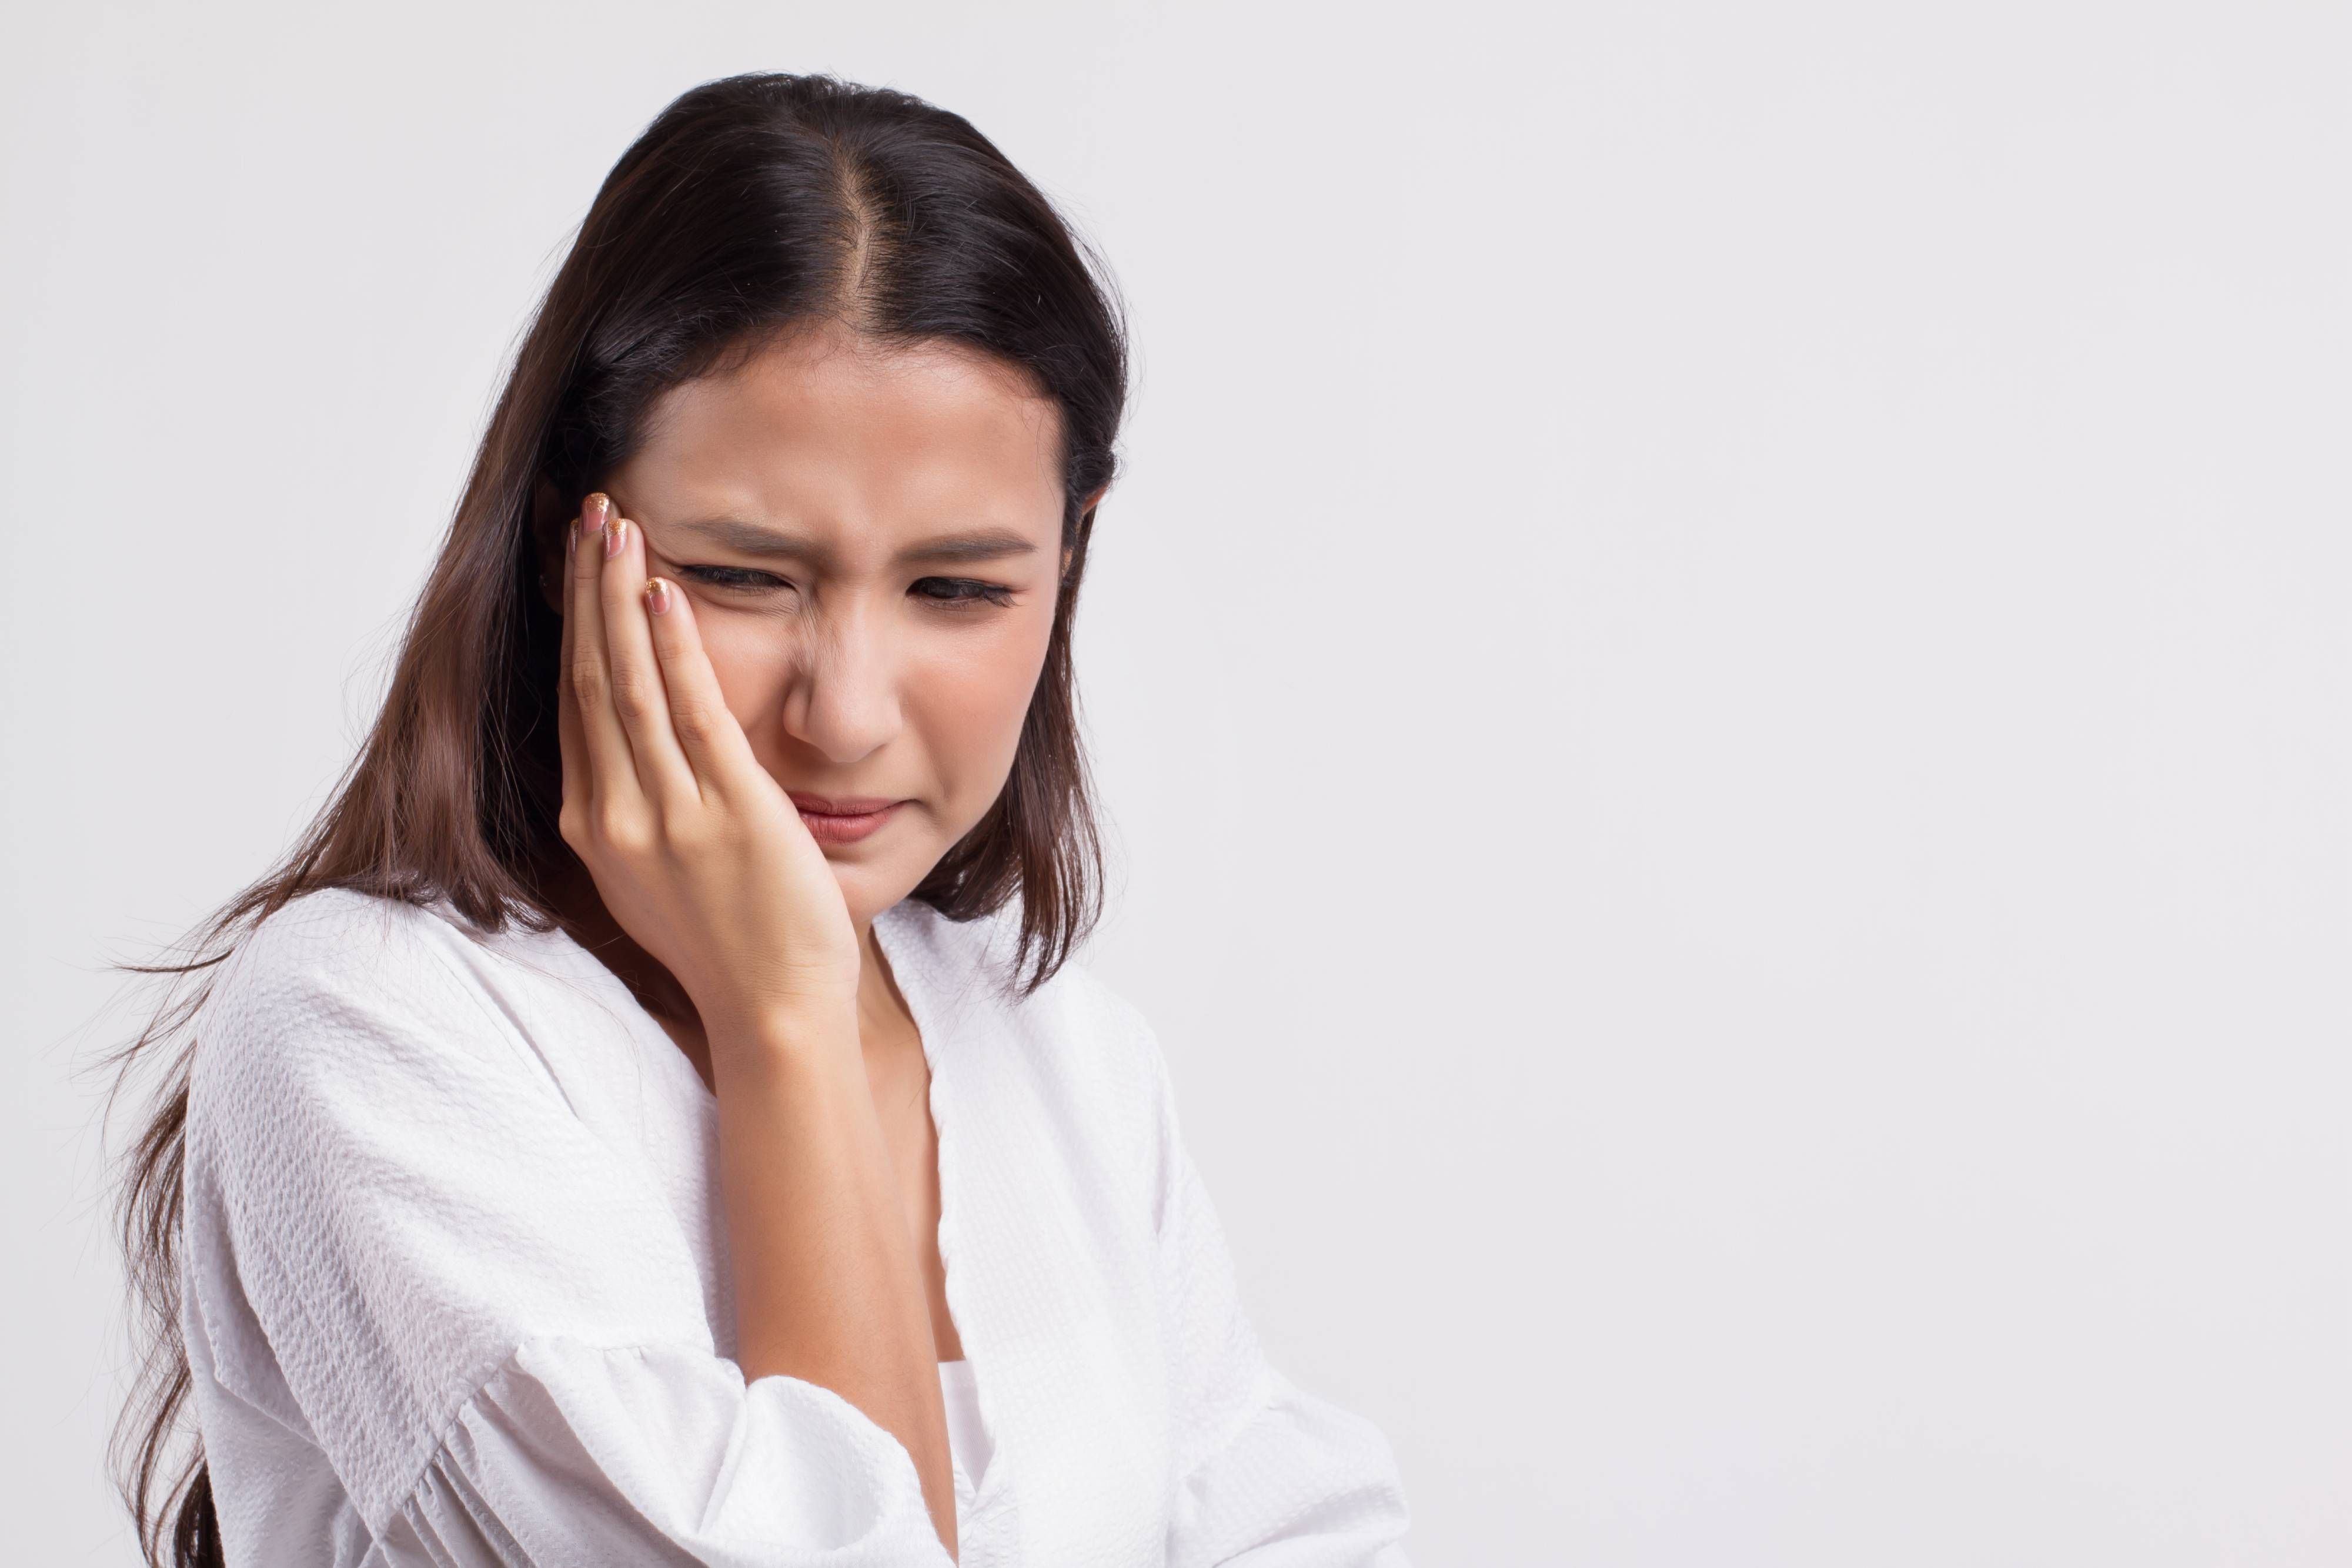 When Is a Root Canal Really Necessary? 8 Signs You Need a Root Canal